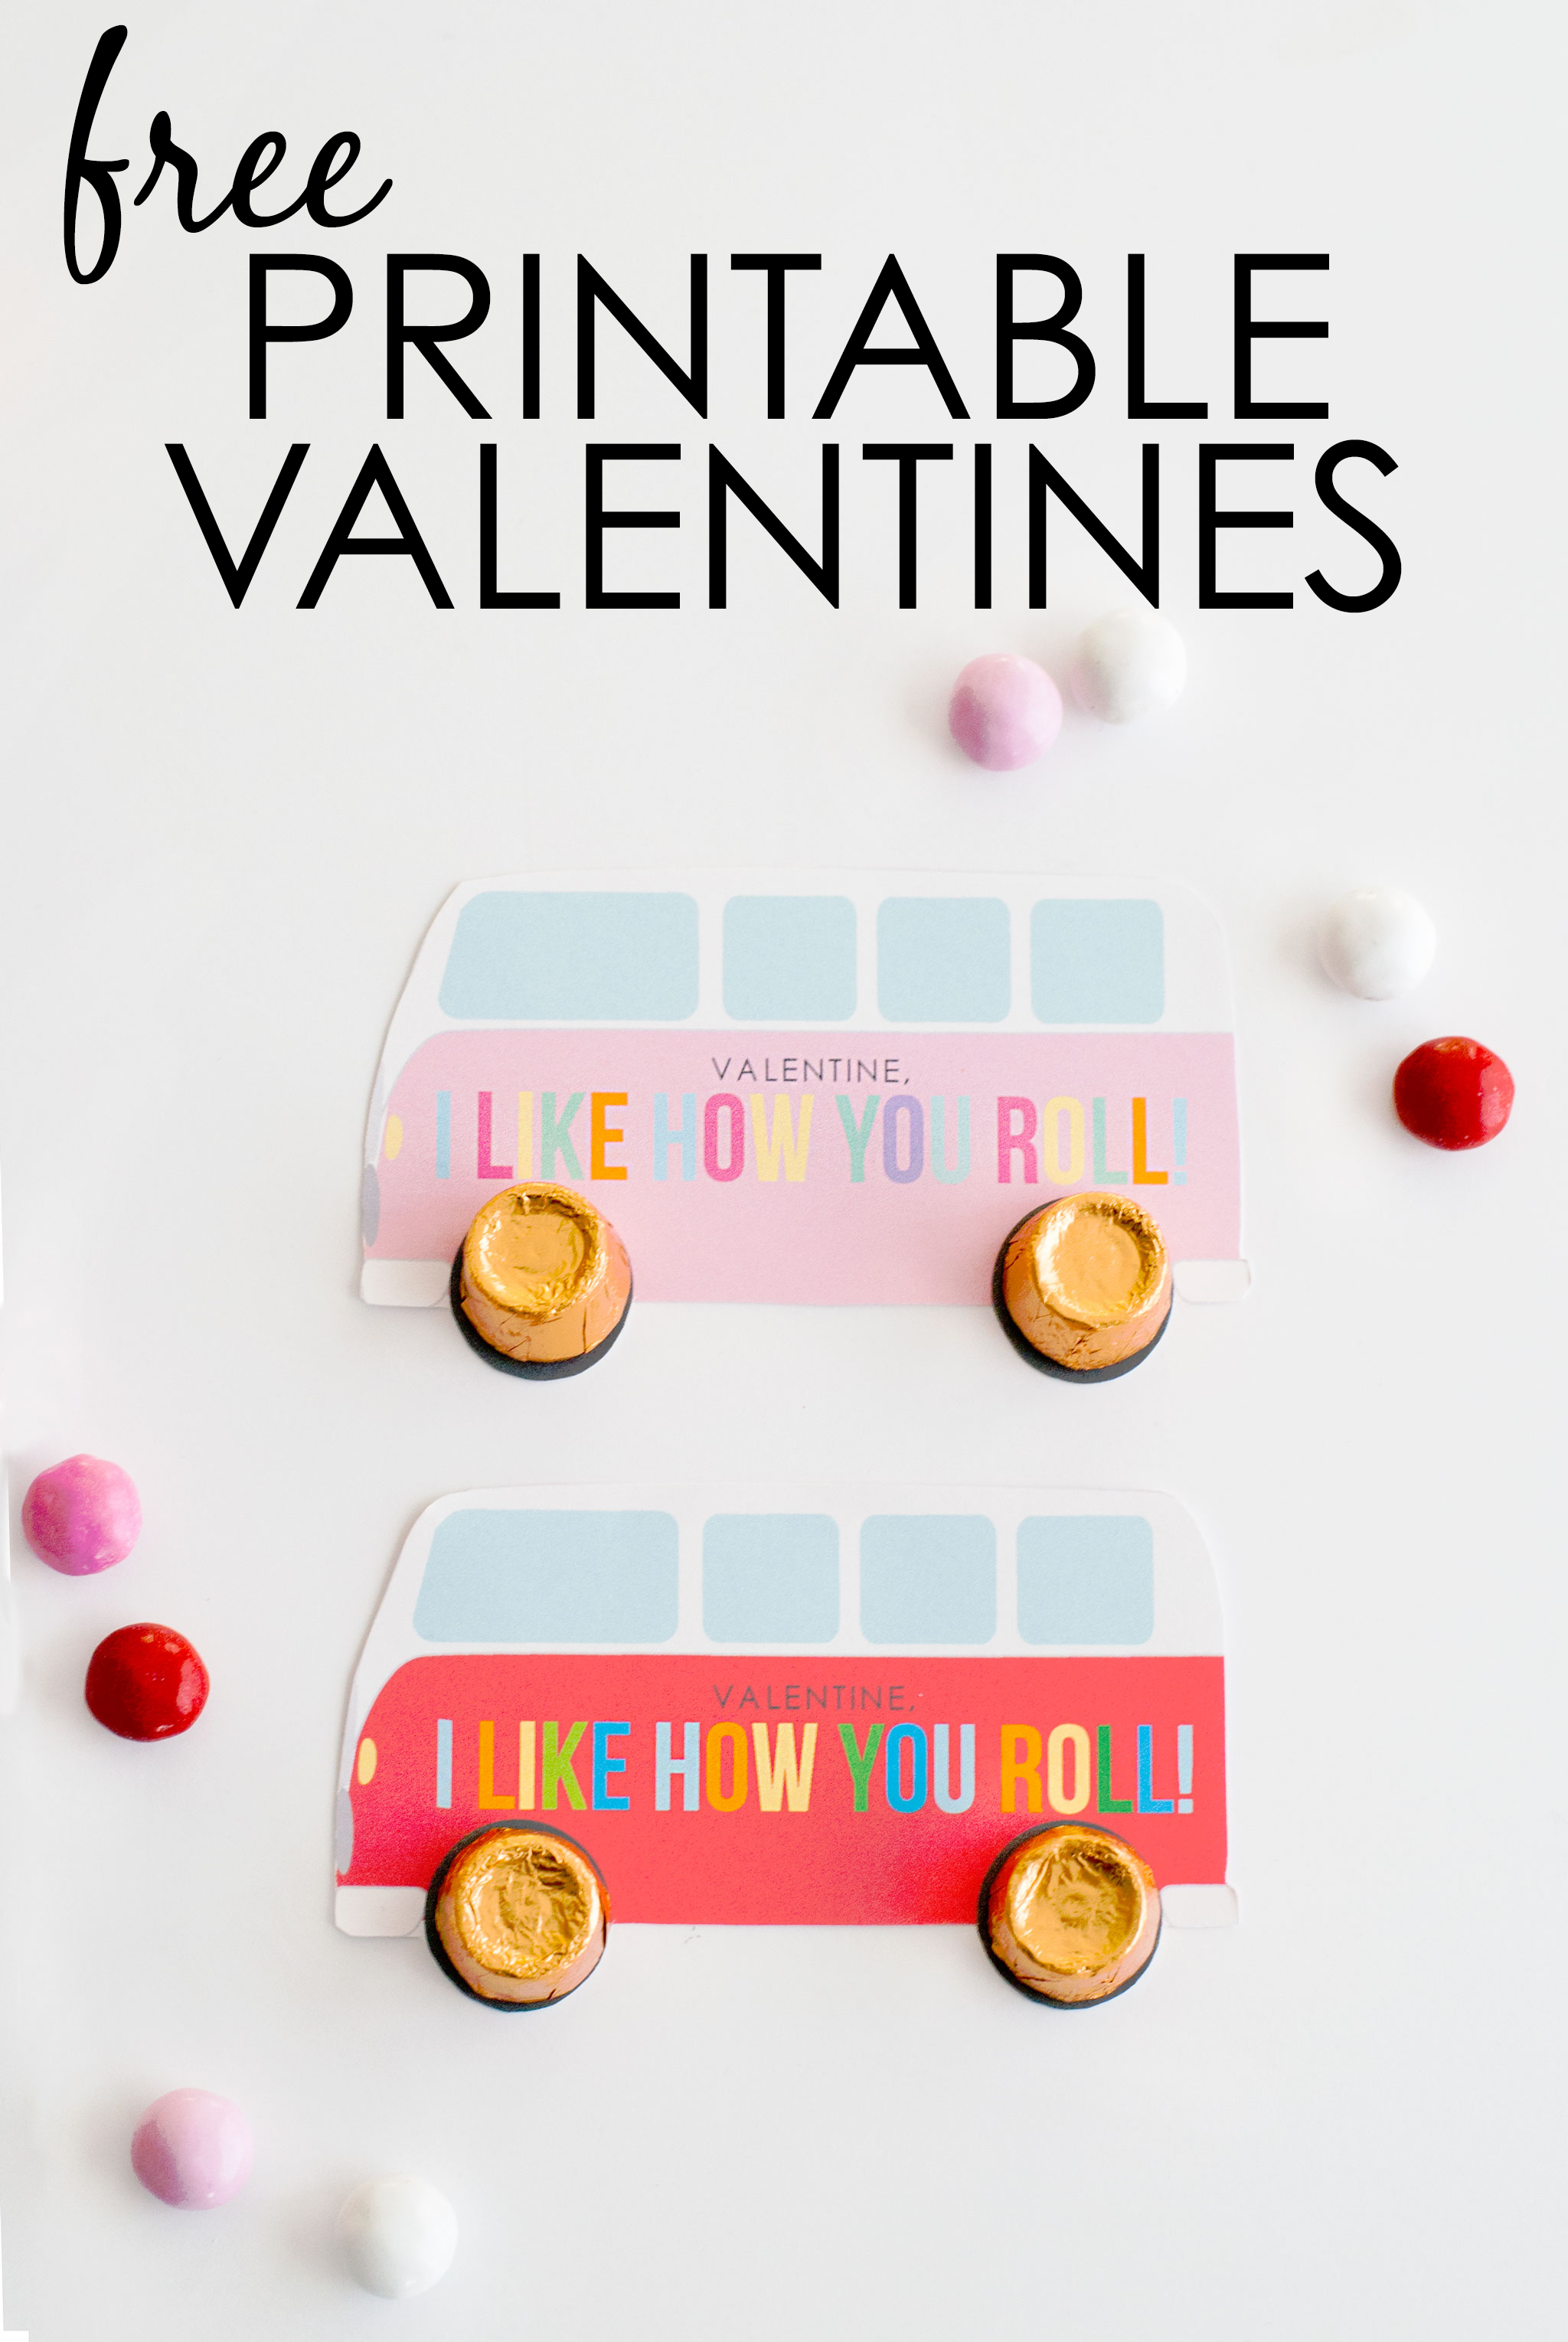 valentines-day-cards-for-school-printable-get-your-hands-on-amazing